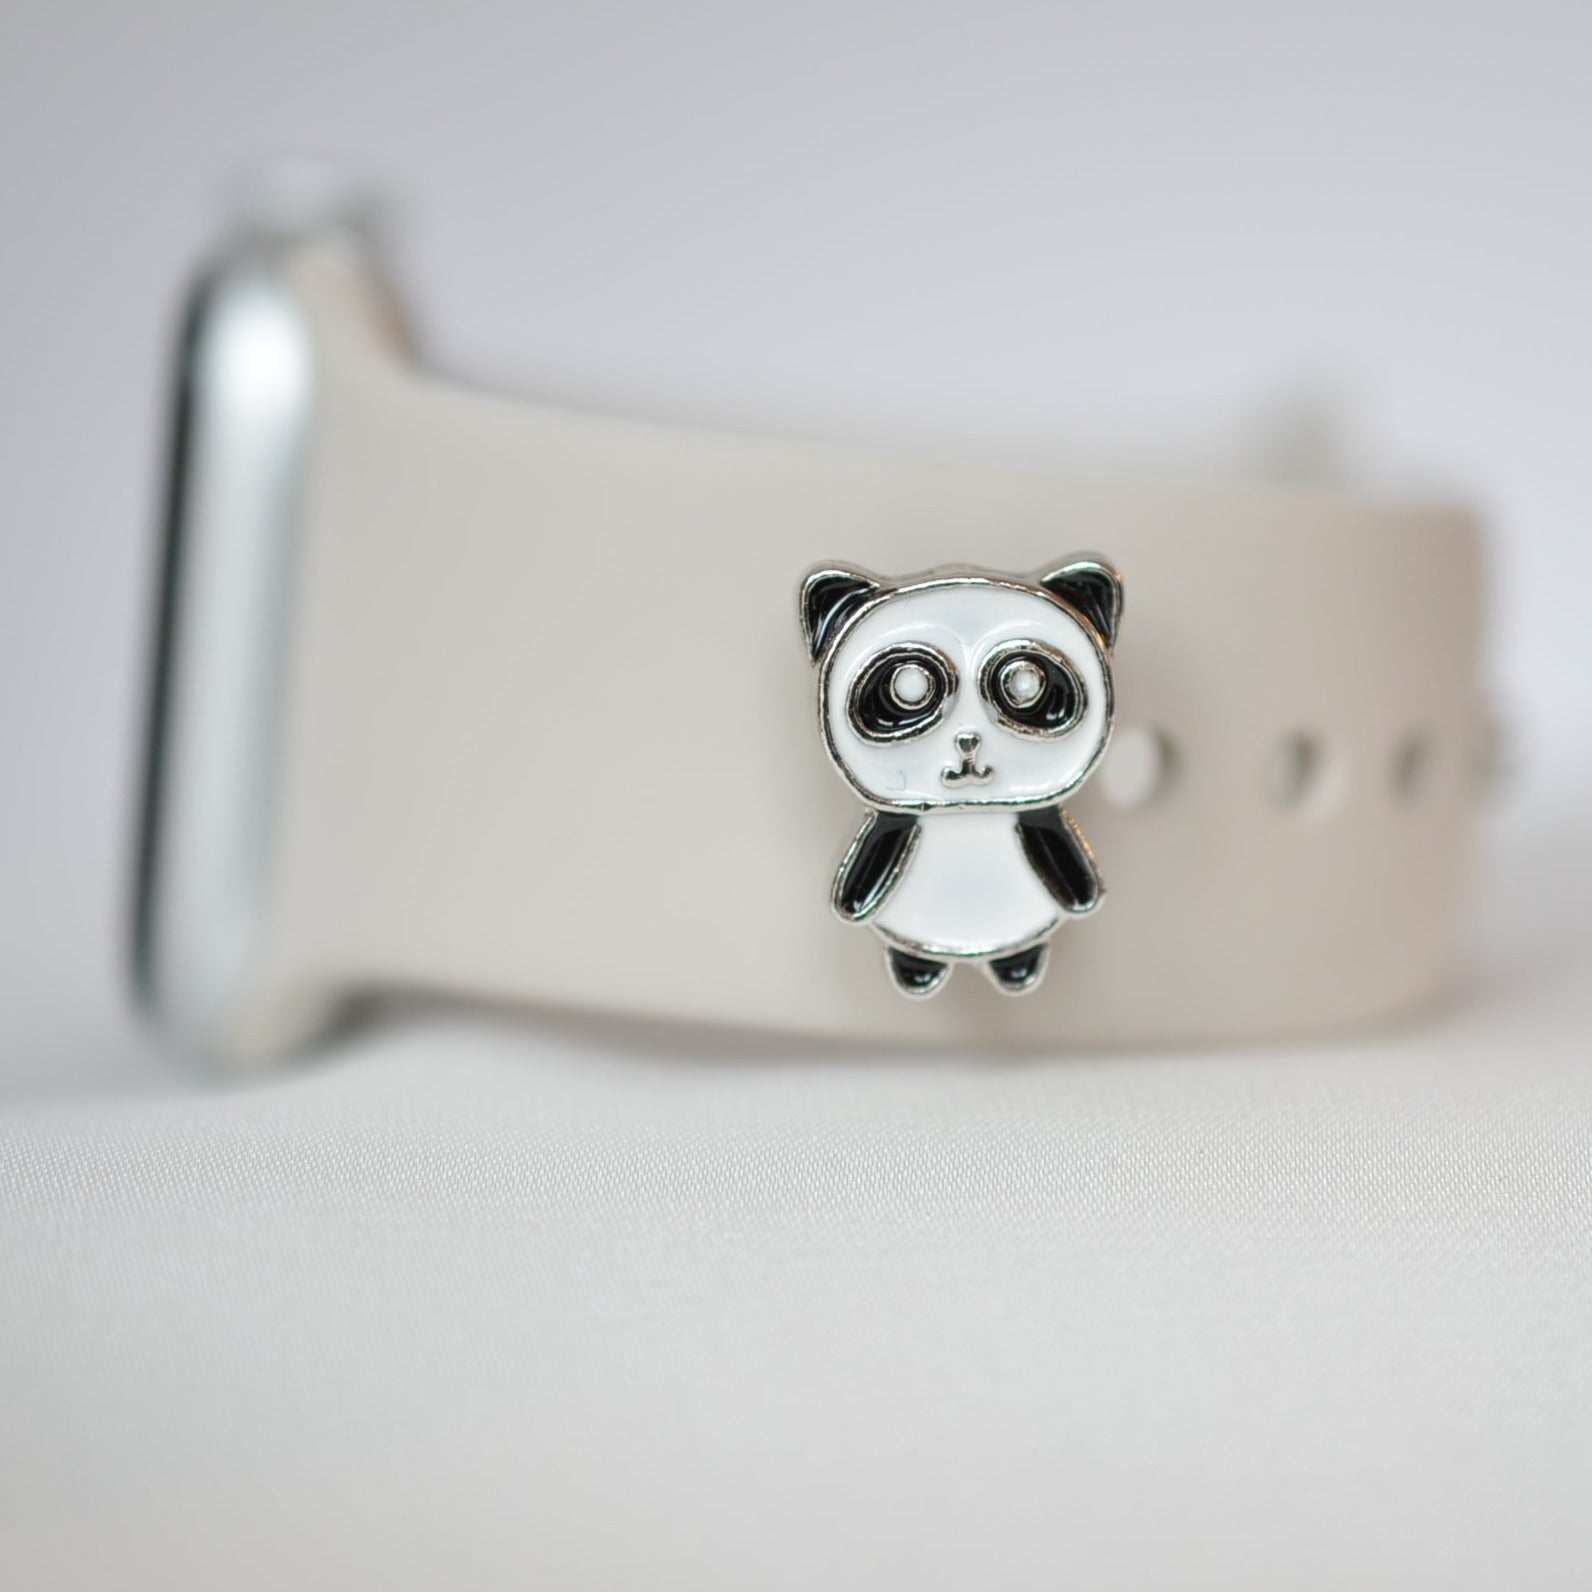 Panda Bear Charm for Watch Bands, Belts and Bags